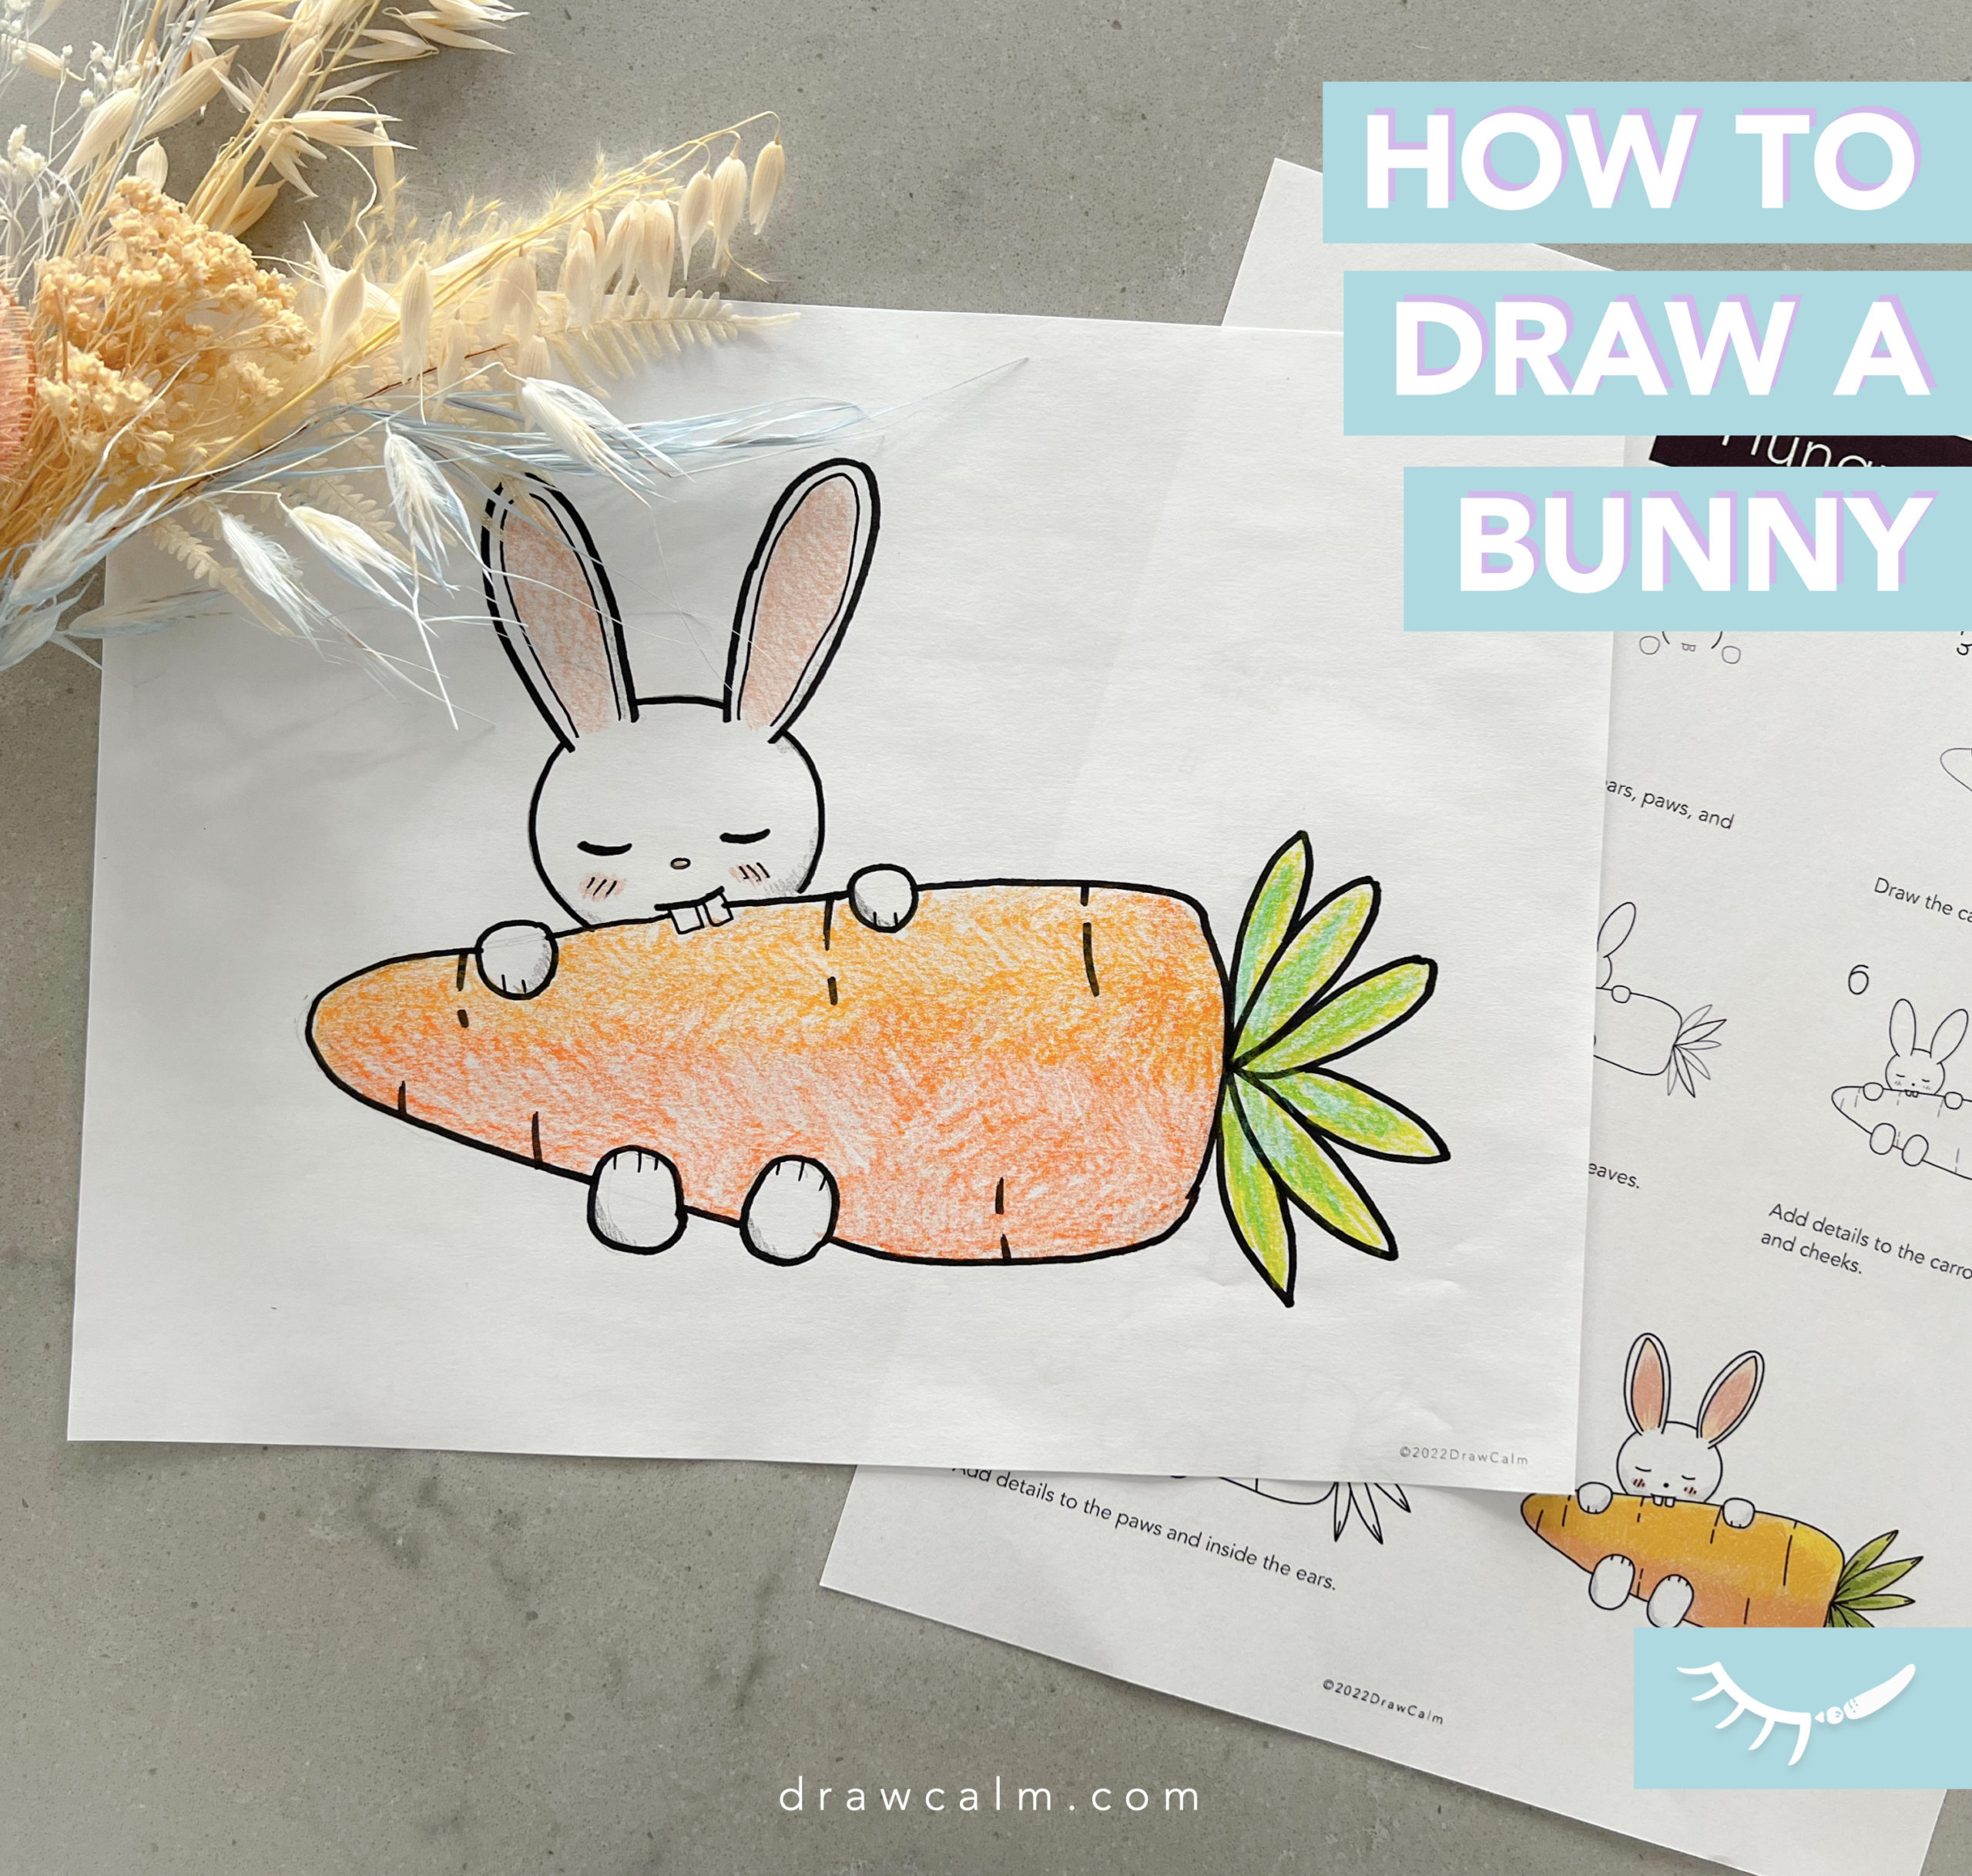 Simple step by step how to draw a bunny. Showing a bunny eating a large carrot.